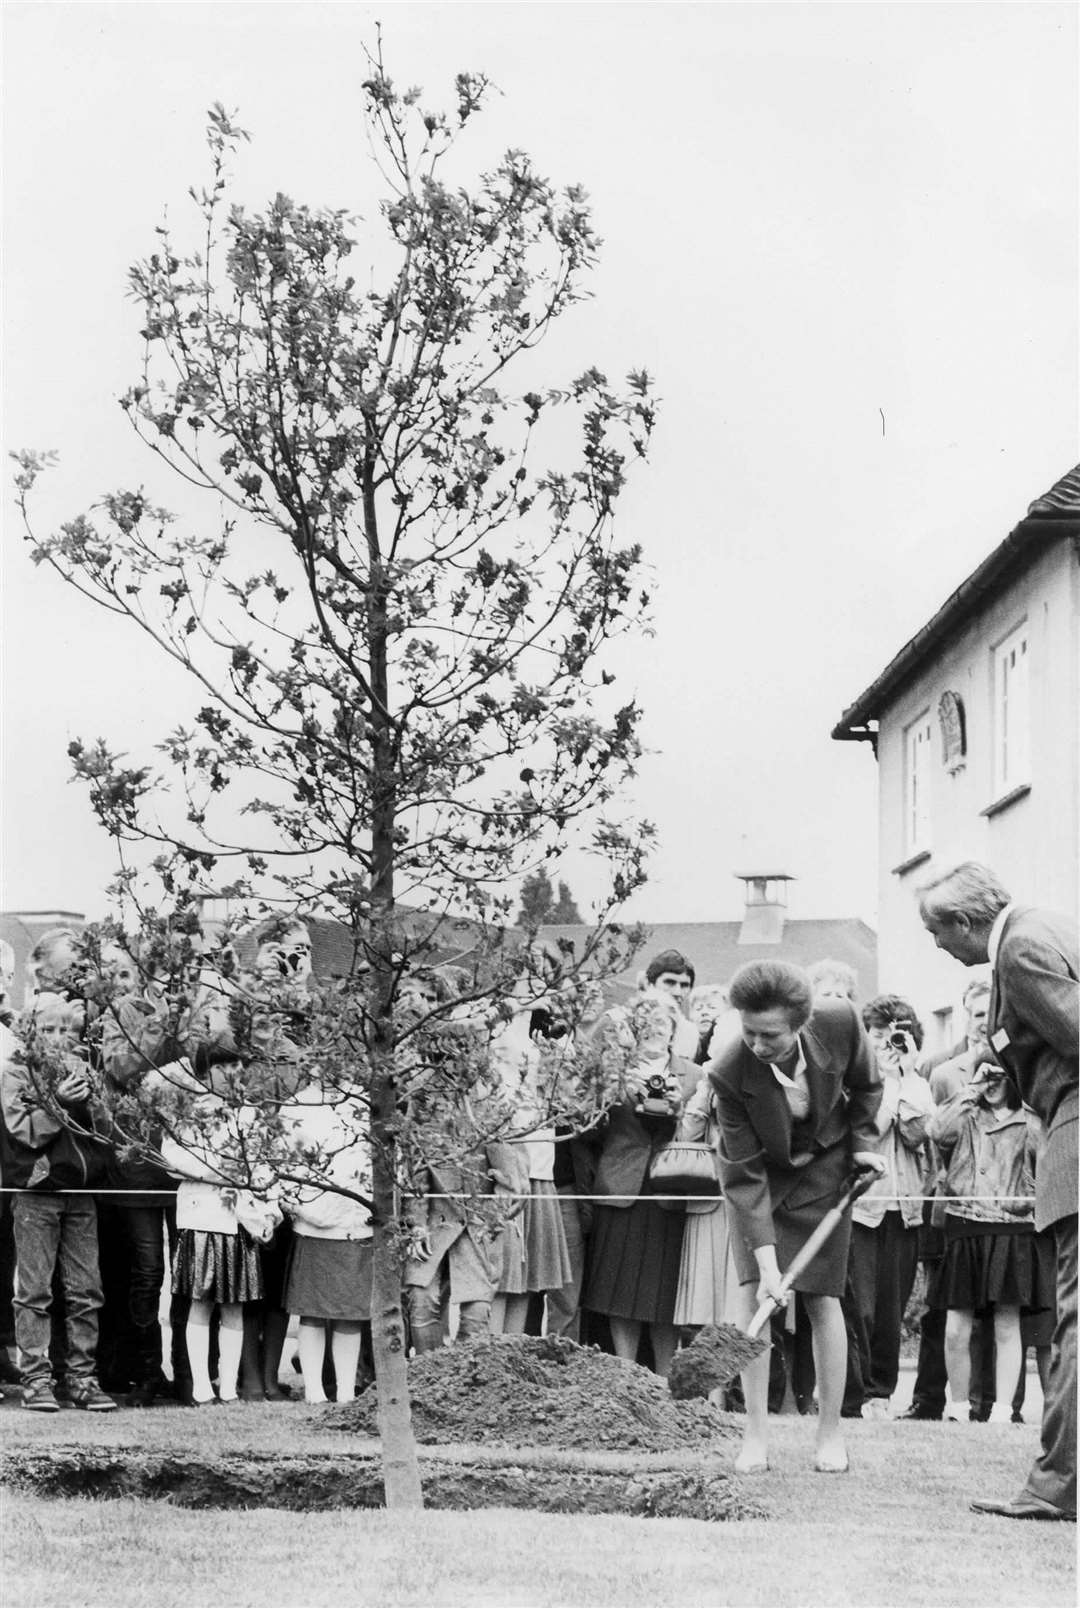 Princess Anne helps plant a tree at East Malling Research Station, 1988